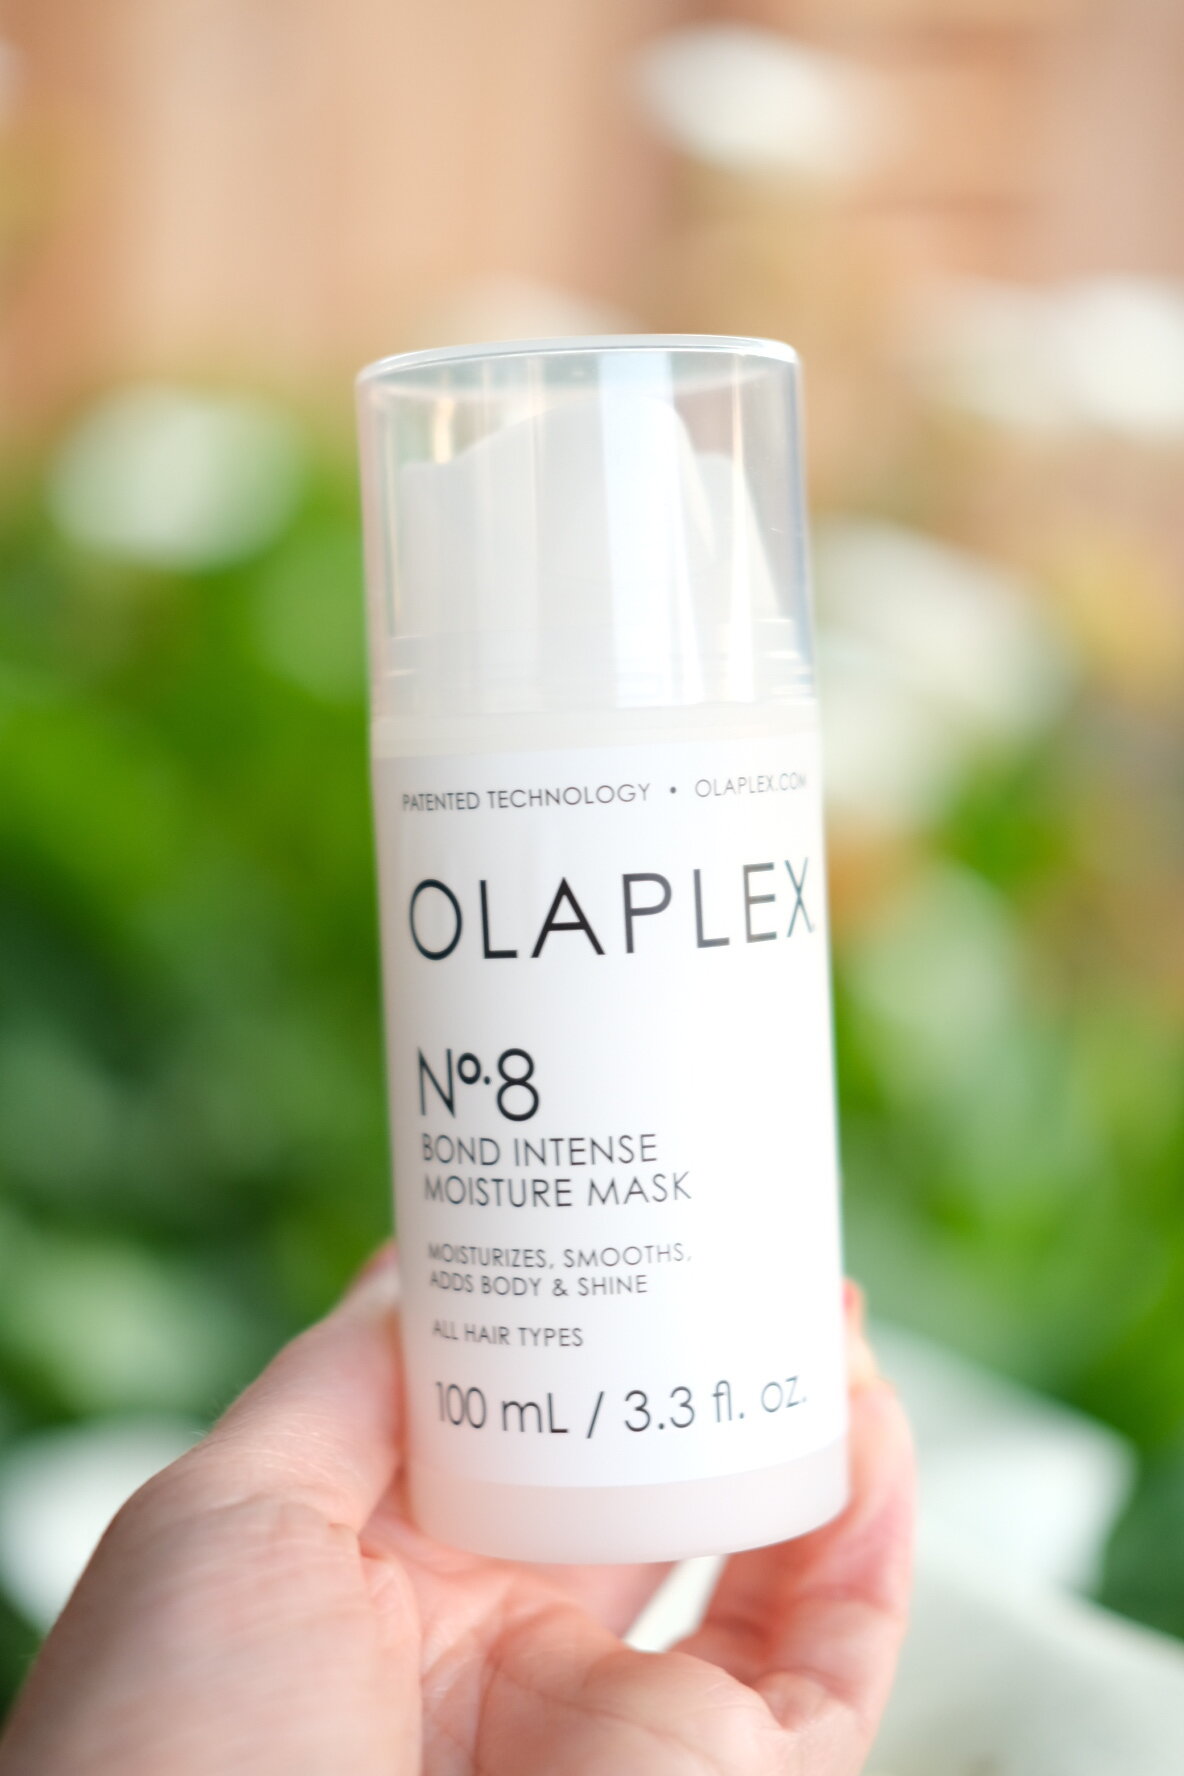 Olaplex no 8 review - everything you need to know about olaplex 8. I'll show you how to use Olaplex number 8 and if olaplex 8 is worth it